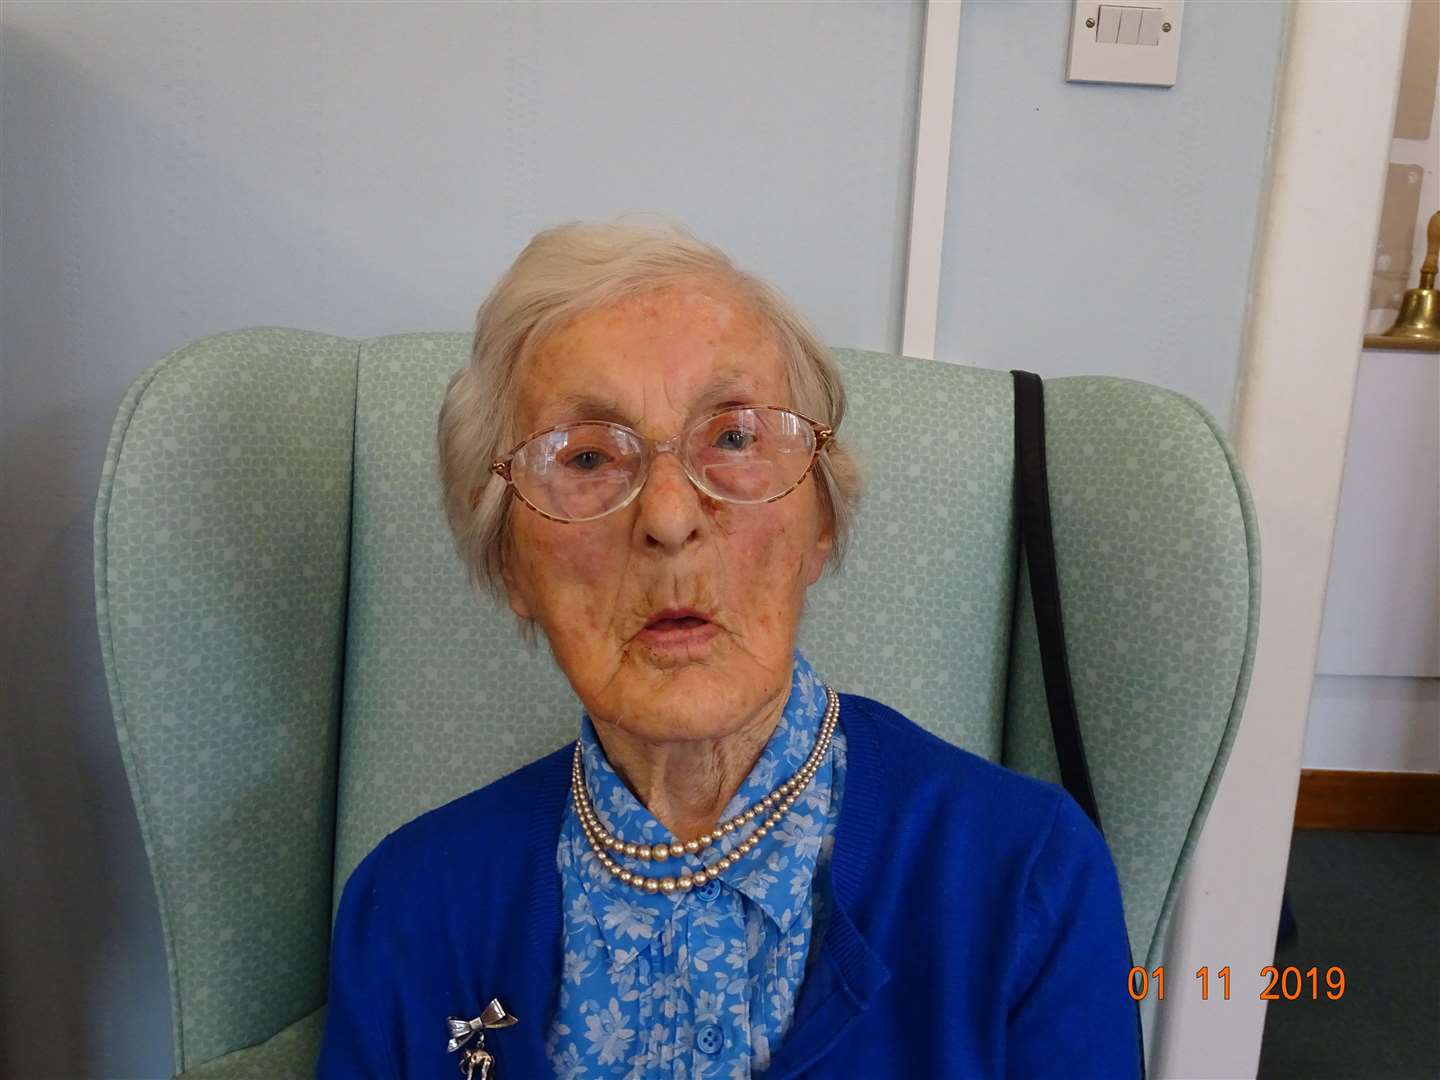 Agnes Williams, a resident of the Isobel Fraser Care Home in Inverness, has died aged 105.